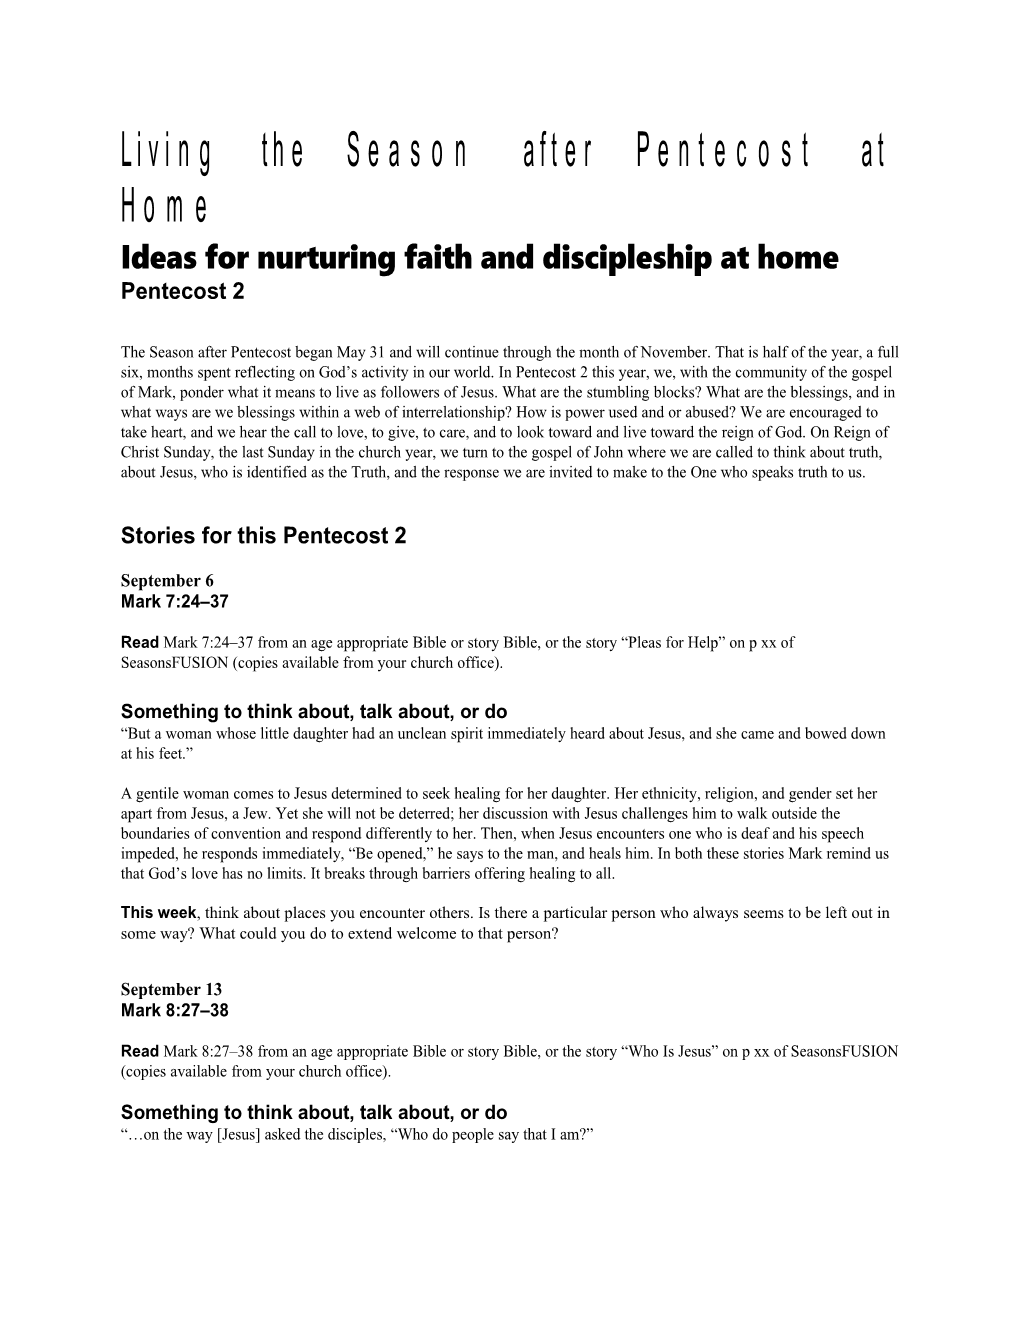 Ideas for Nurturing Faith and Discipleship at Home